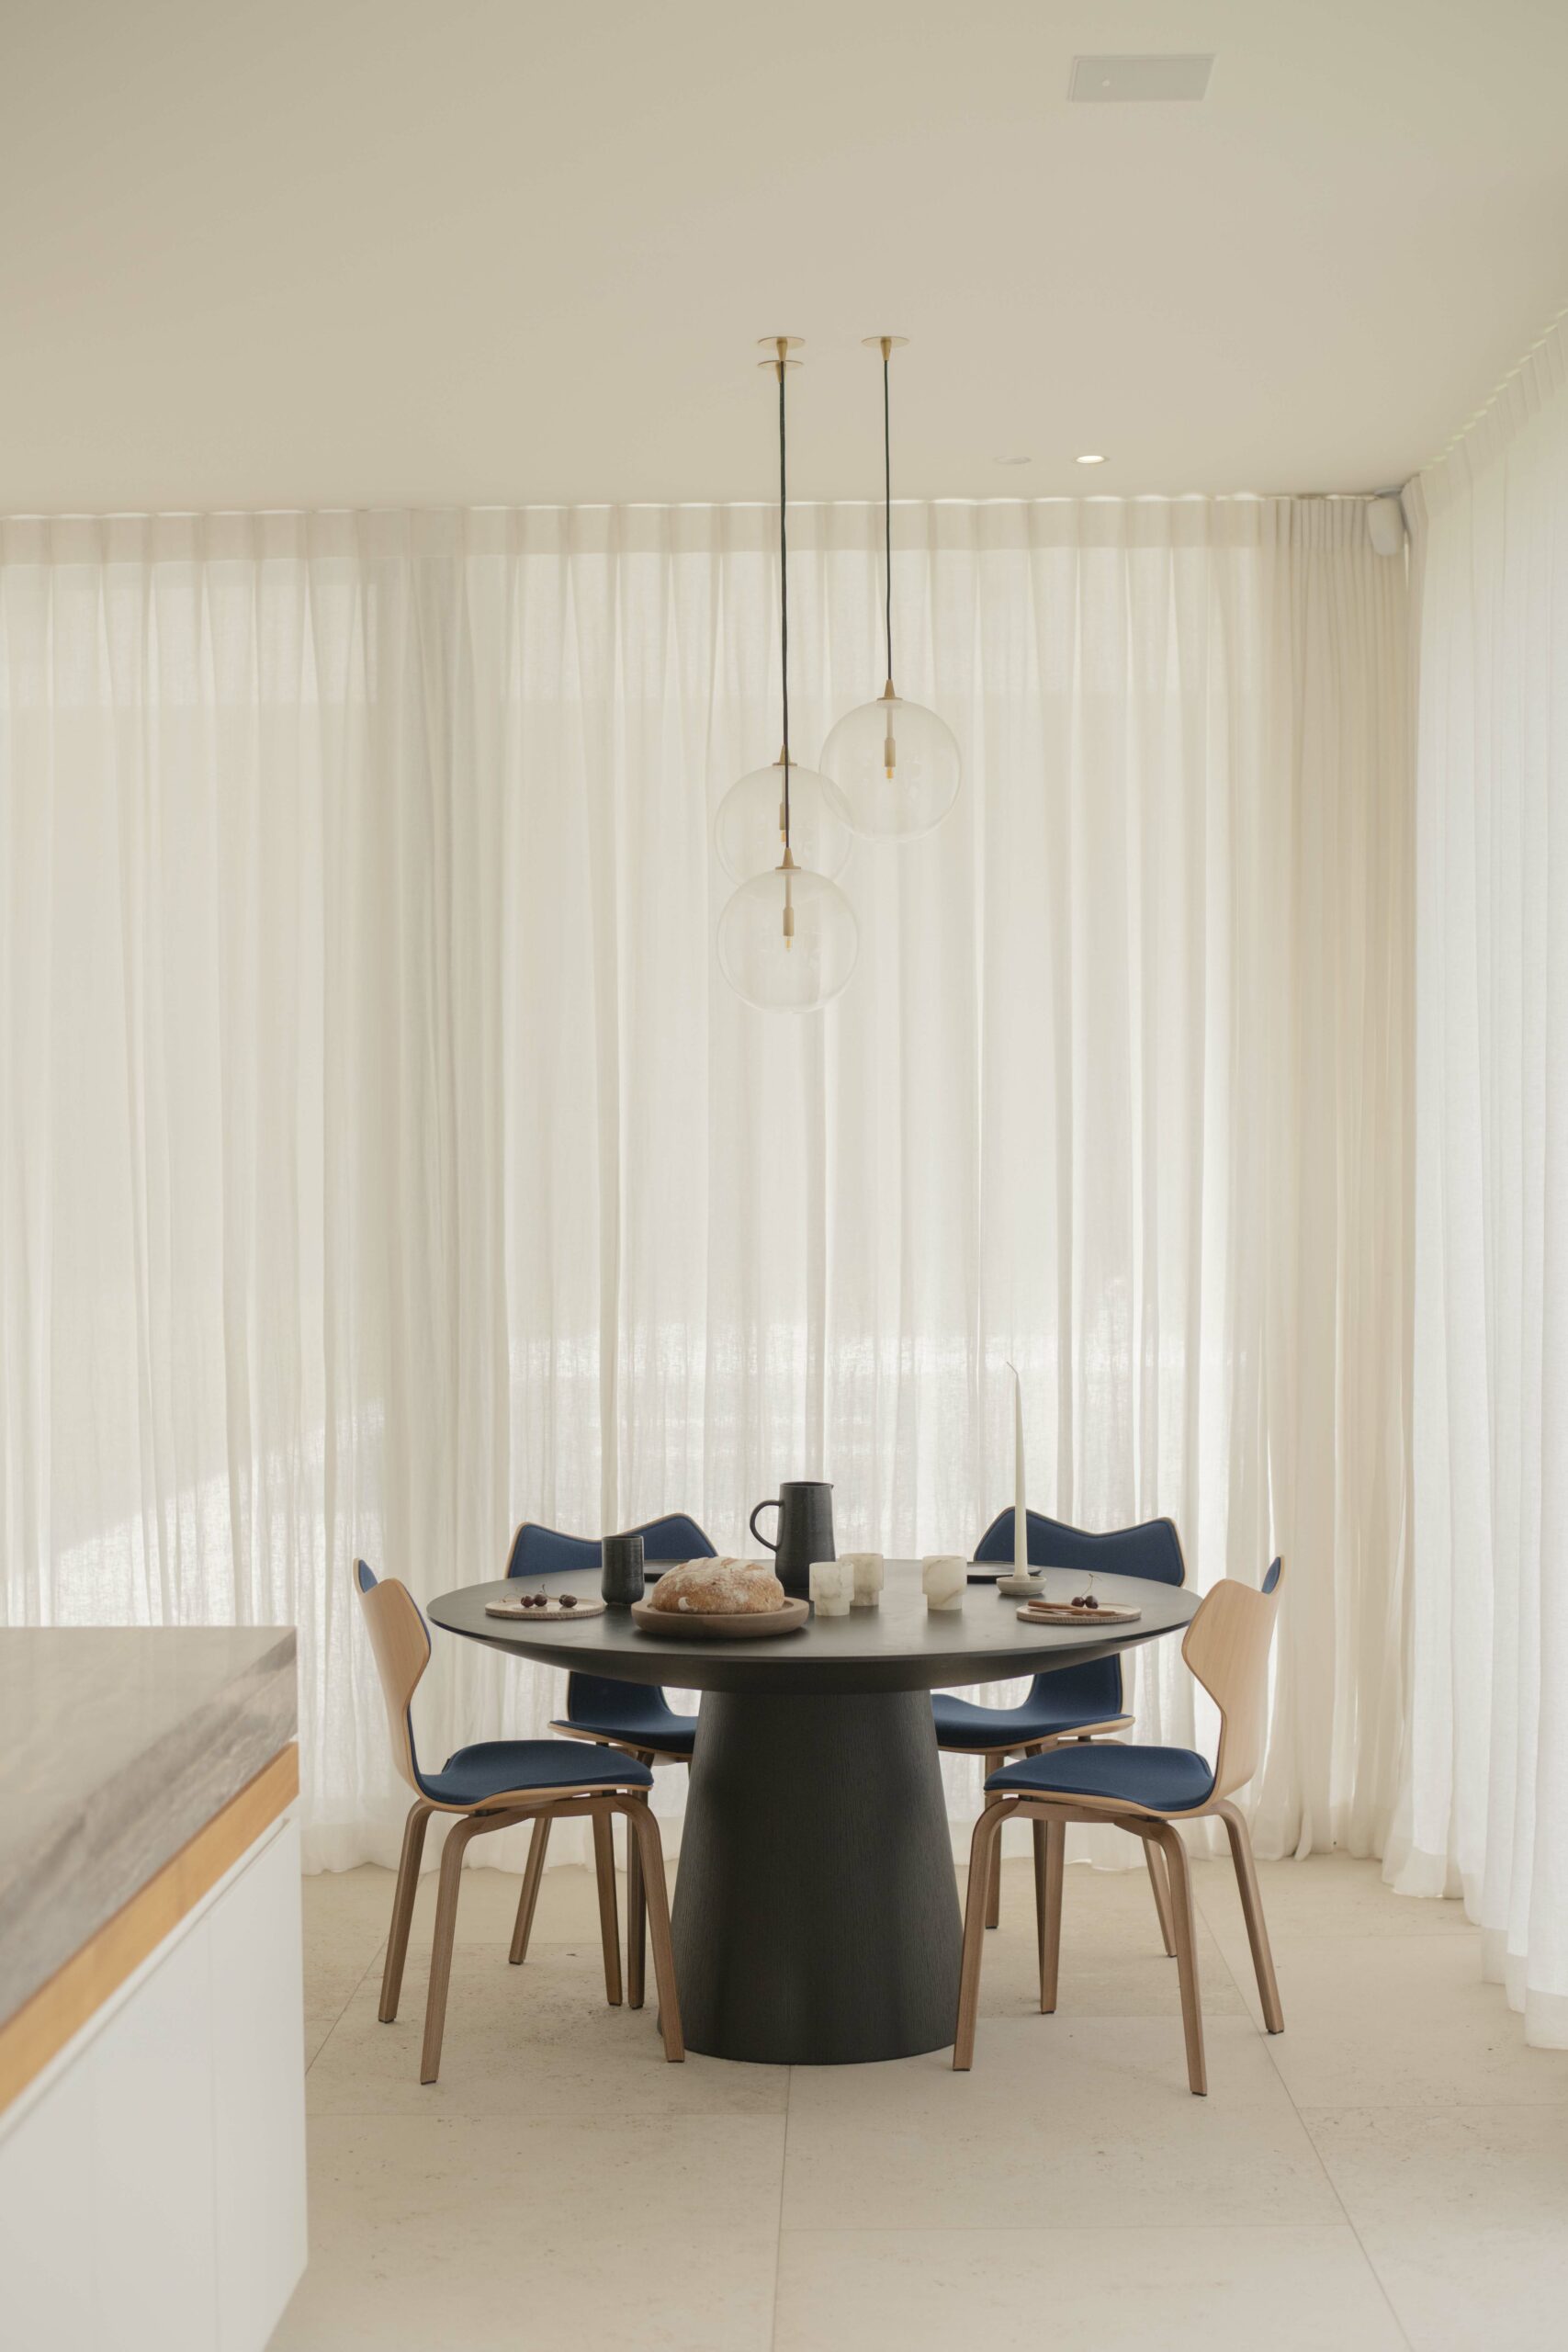 Elegant dining area with sheer curtains, cascading orb lights, and a dark round table. Blue chairs and minimalist decor enhance the serene ambiance.